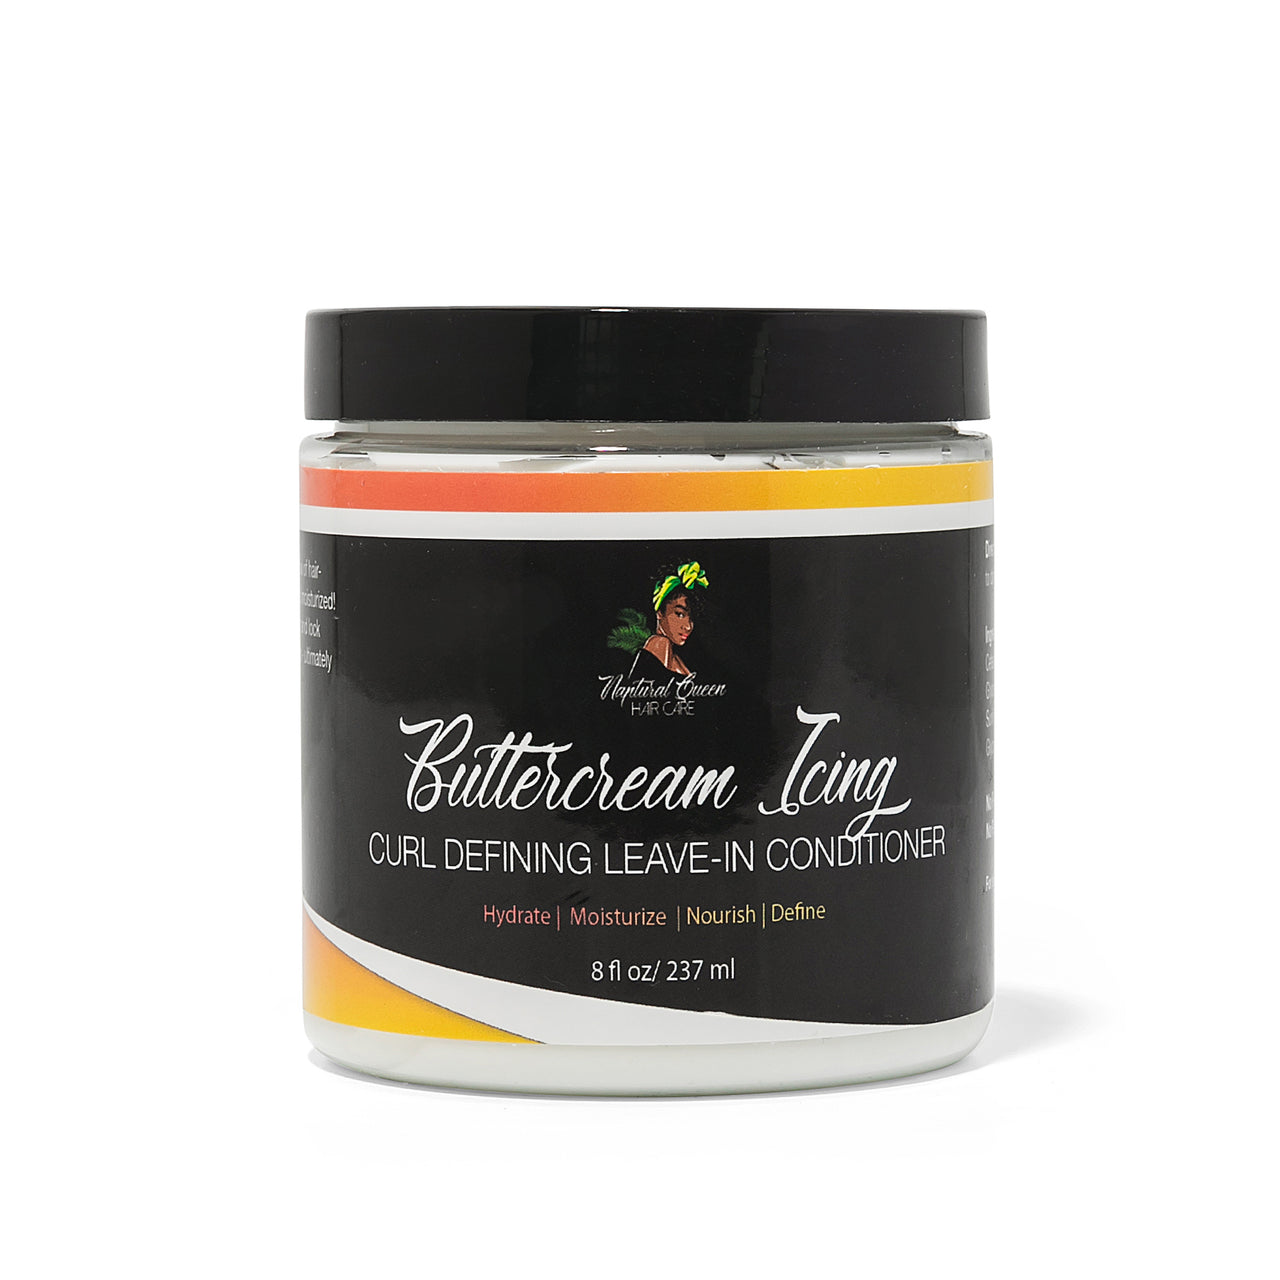 Buttercream Icing Curl Defining Leave-in Conditioner